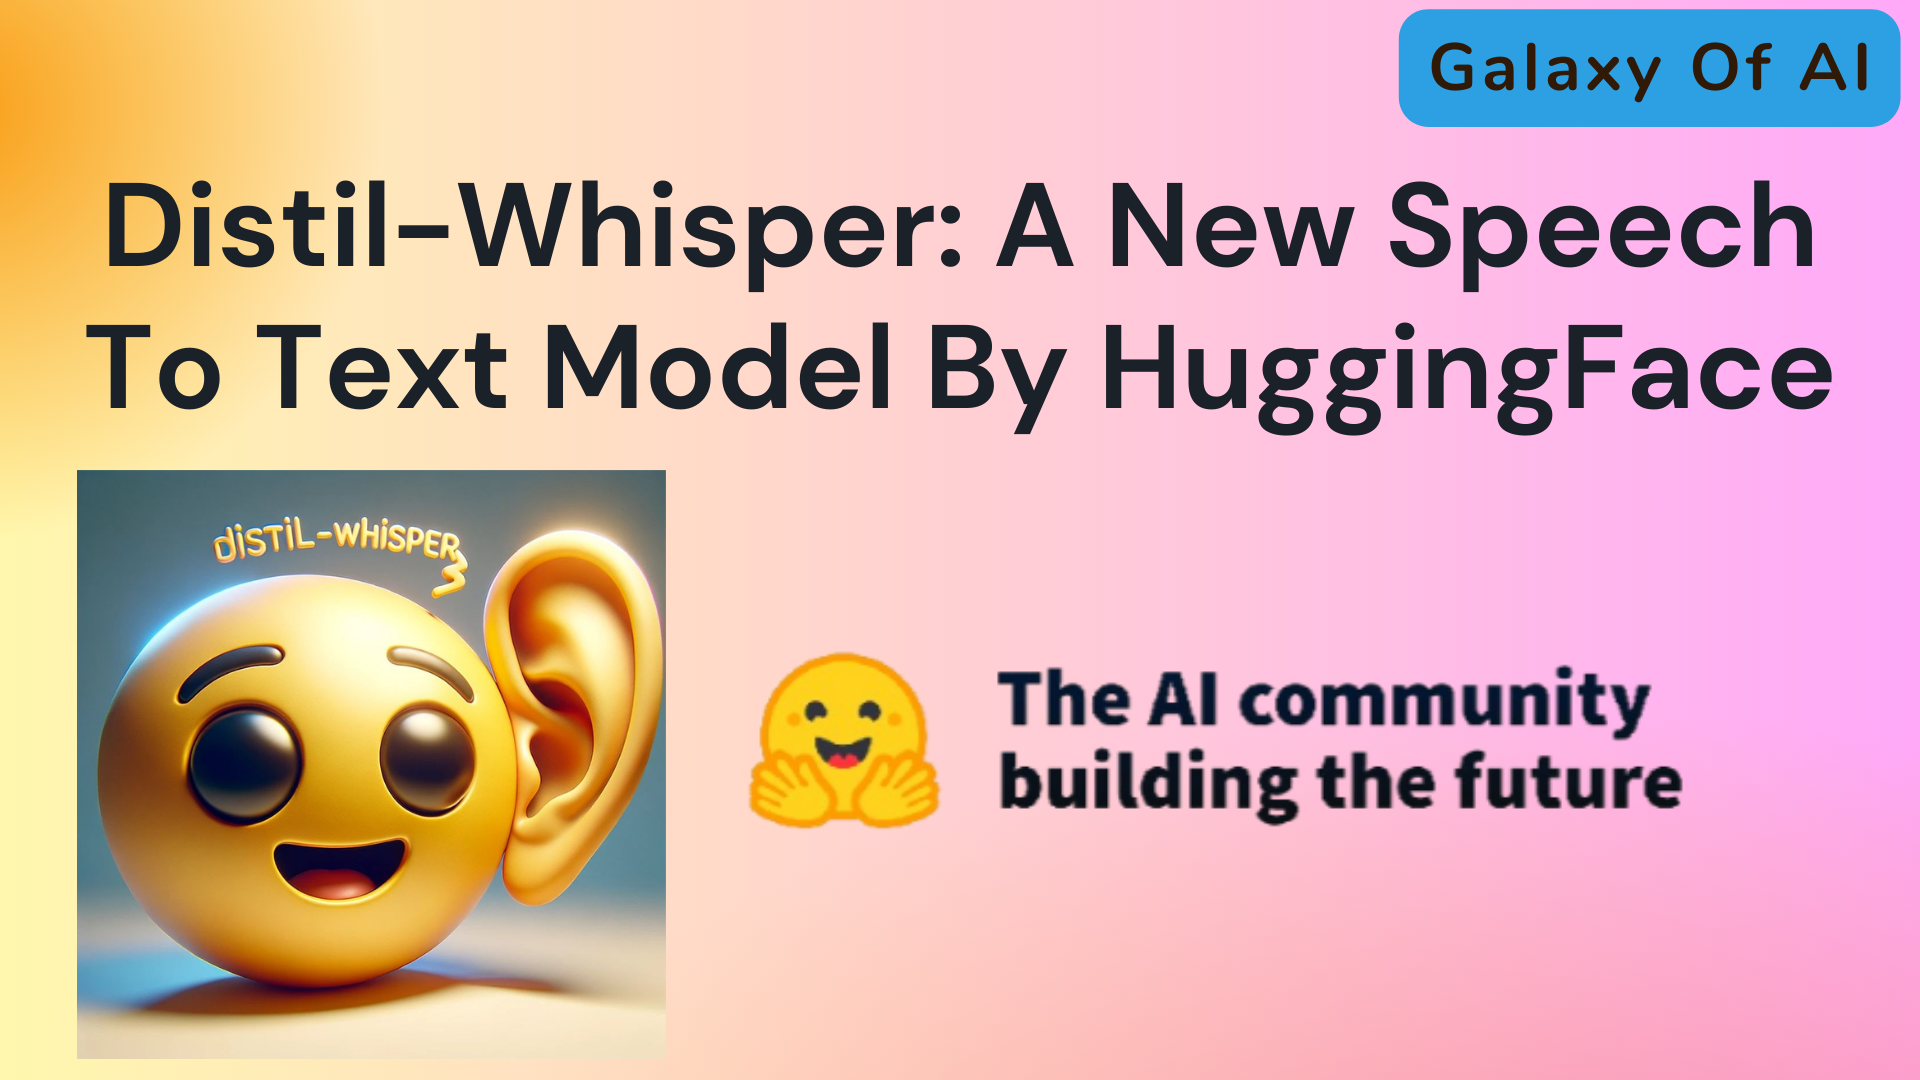 Distil-Whisper: A New Speech To Text Model By HuggingFaceDistil-Whisper: A New Speech To Text Model By HuggingFace